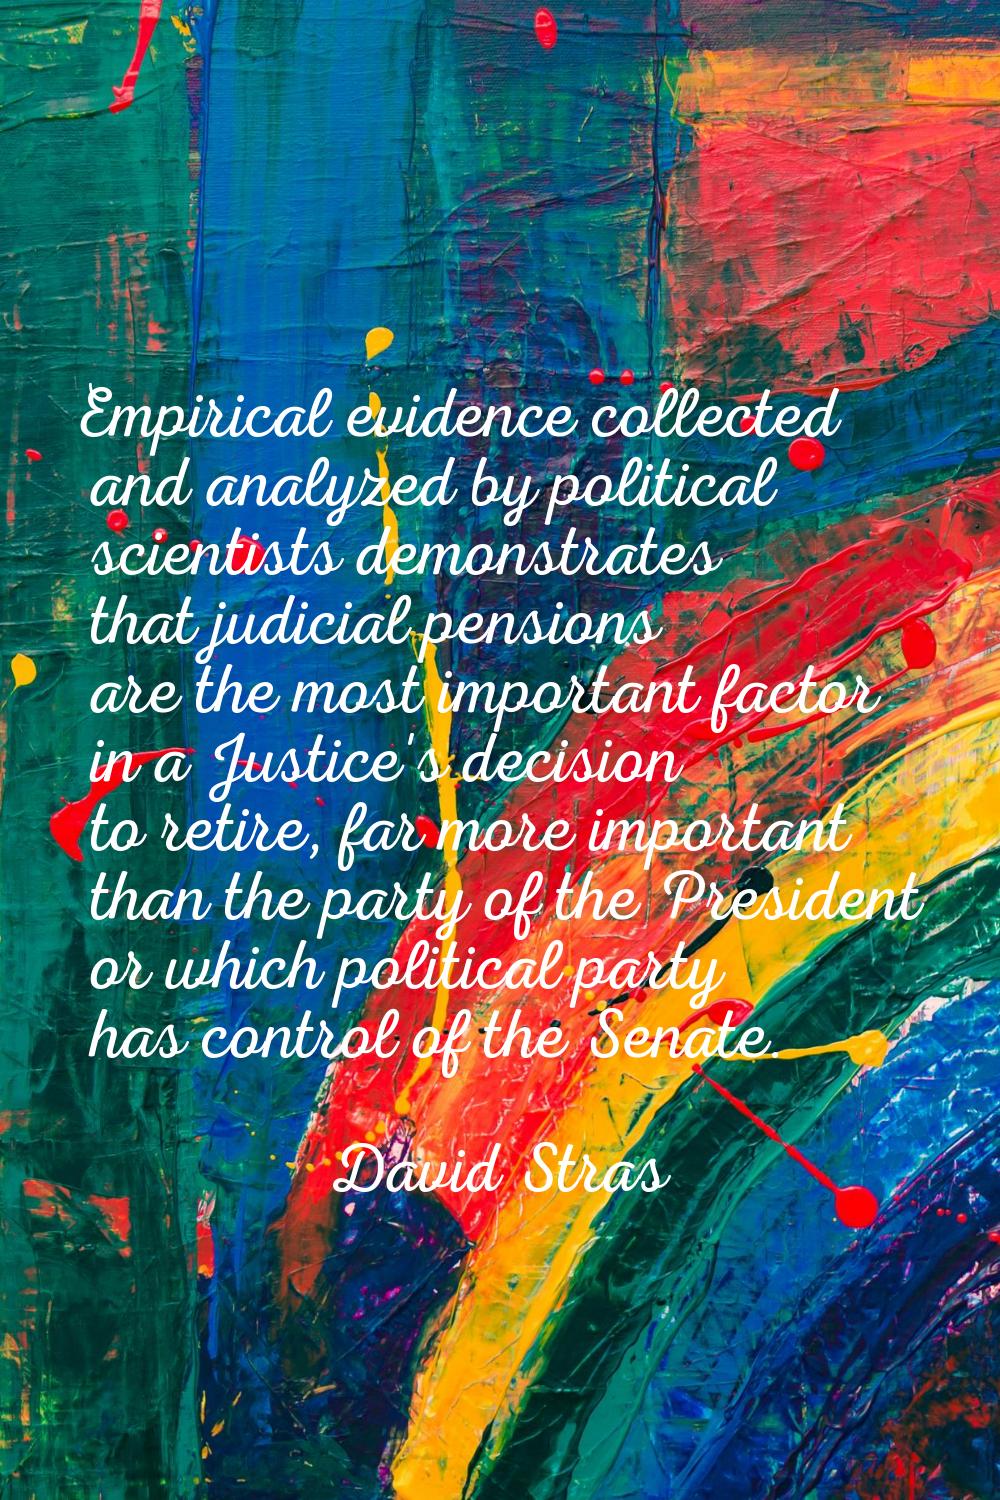 Empirical evidence collected and analyzed by political scientists demonstrates that judicial pensio